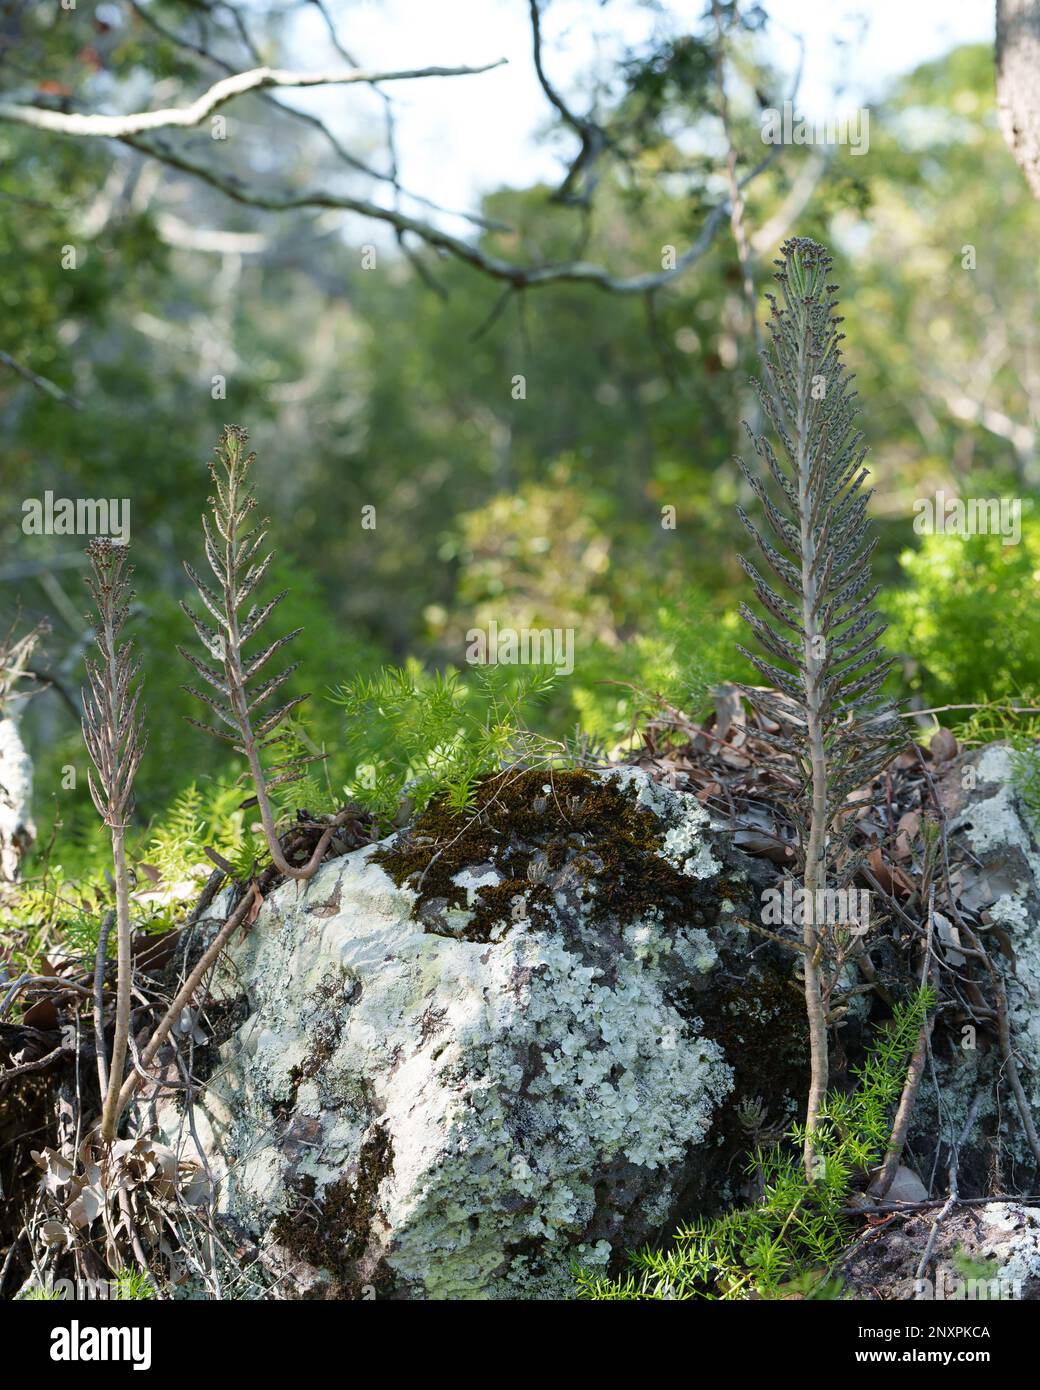 Mother of millions and asparagus weed growing in native bushland on Coochiemudlo Island, Queensland, Australia Stock Photo